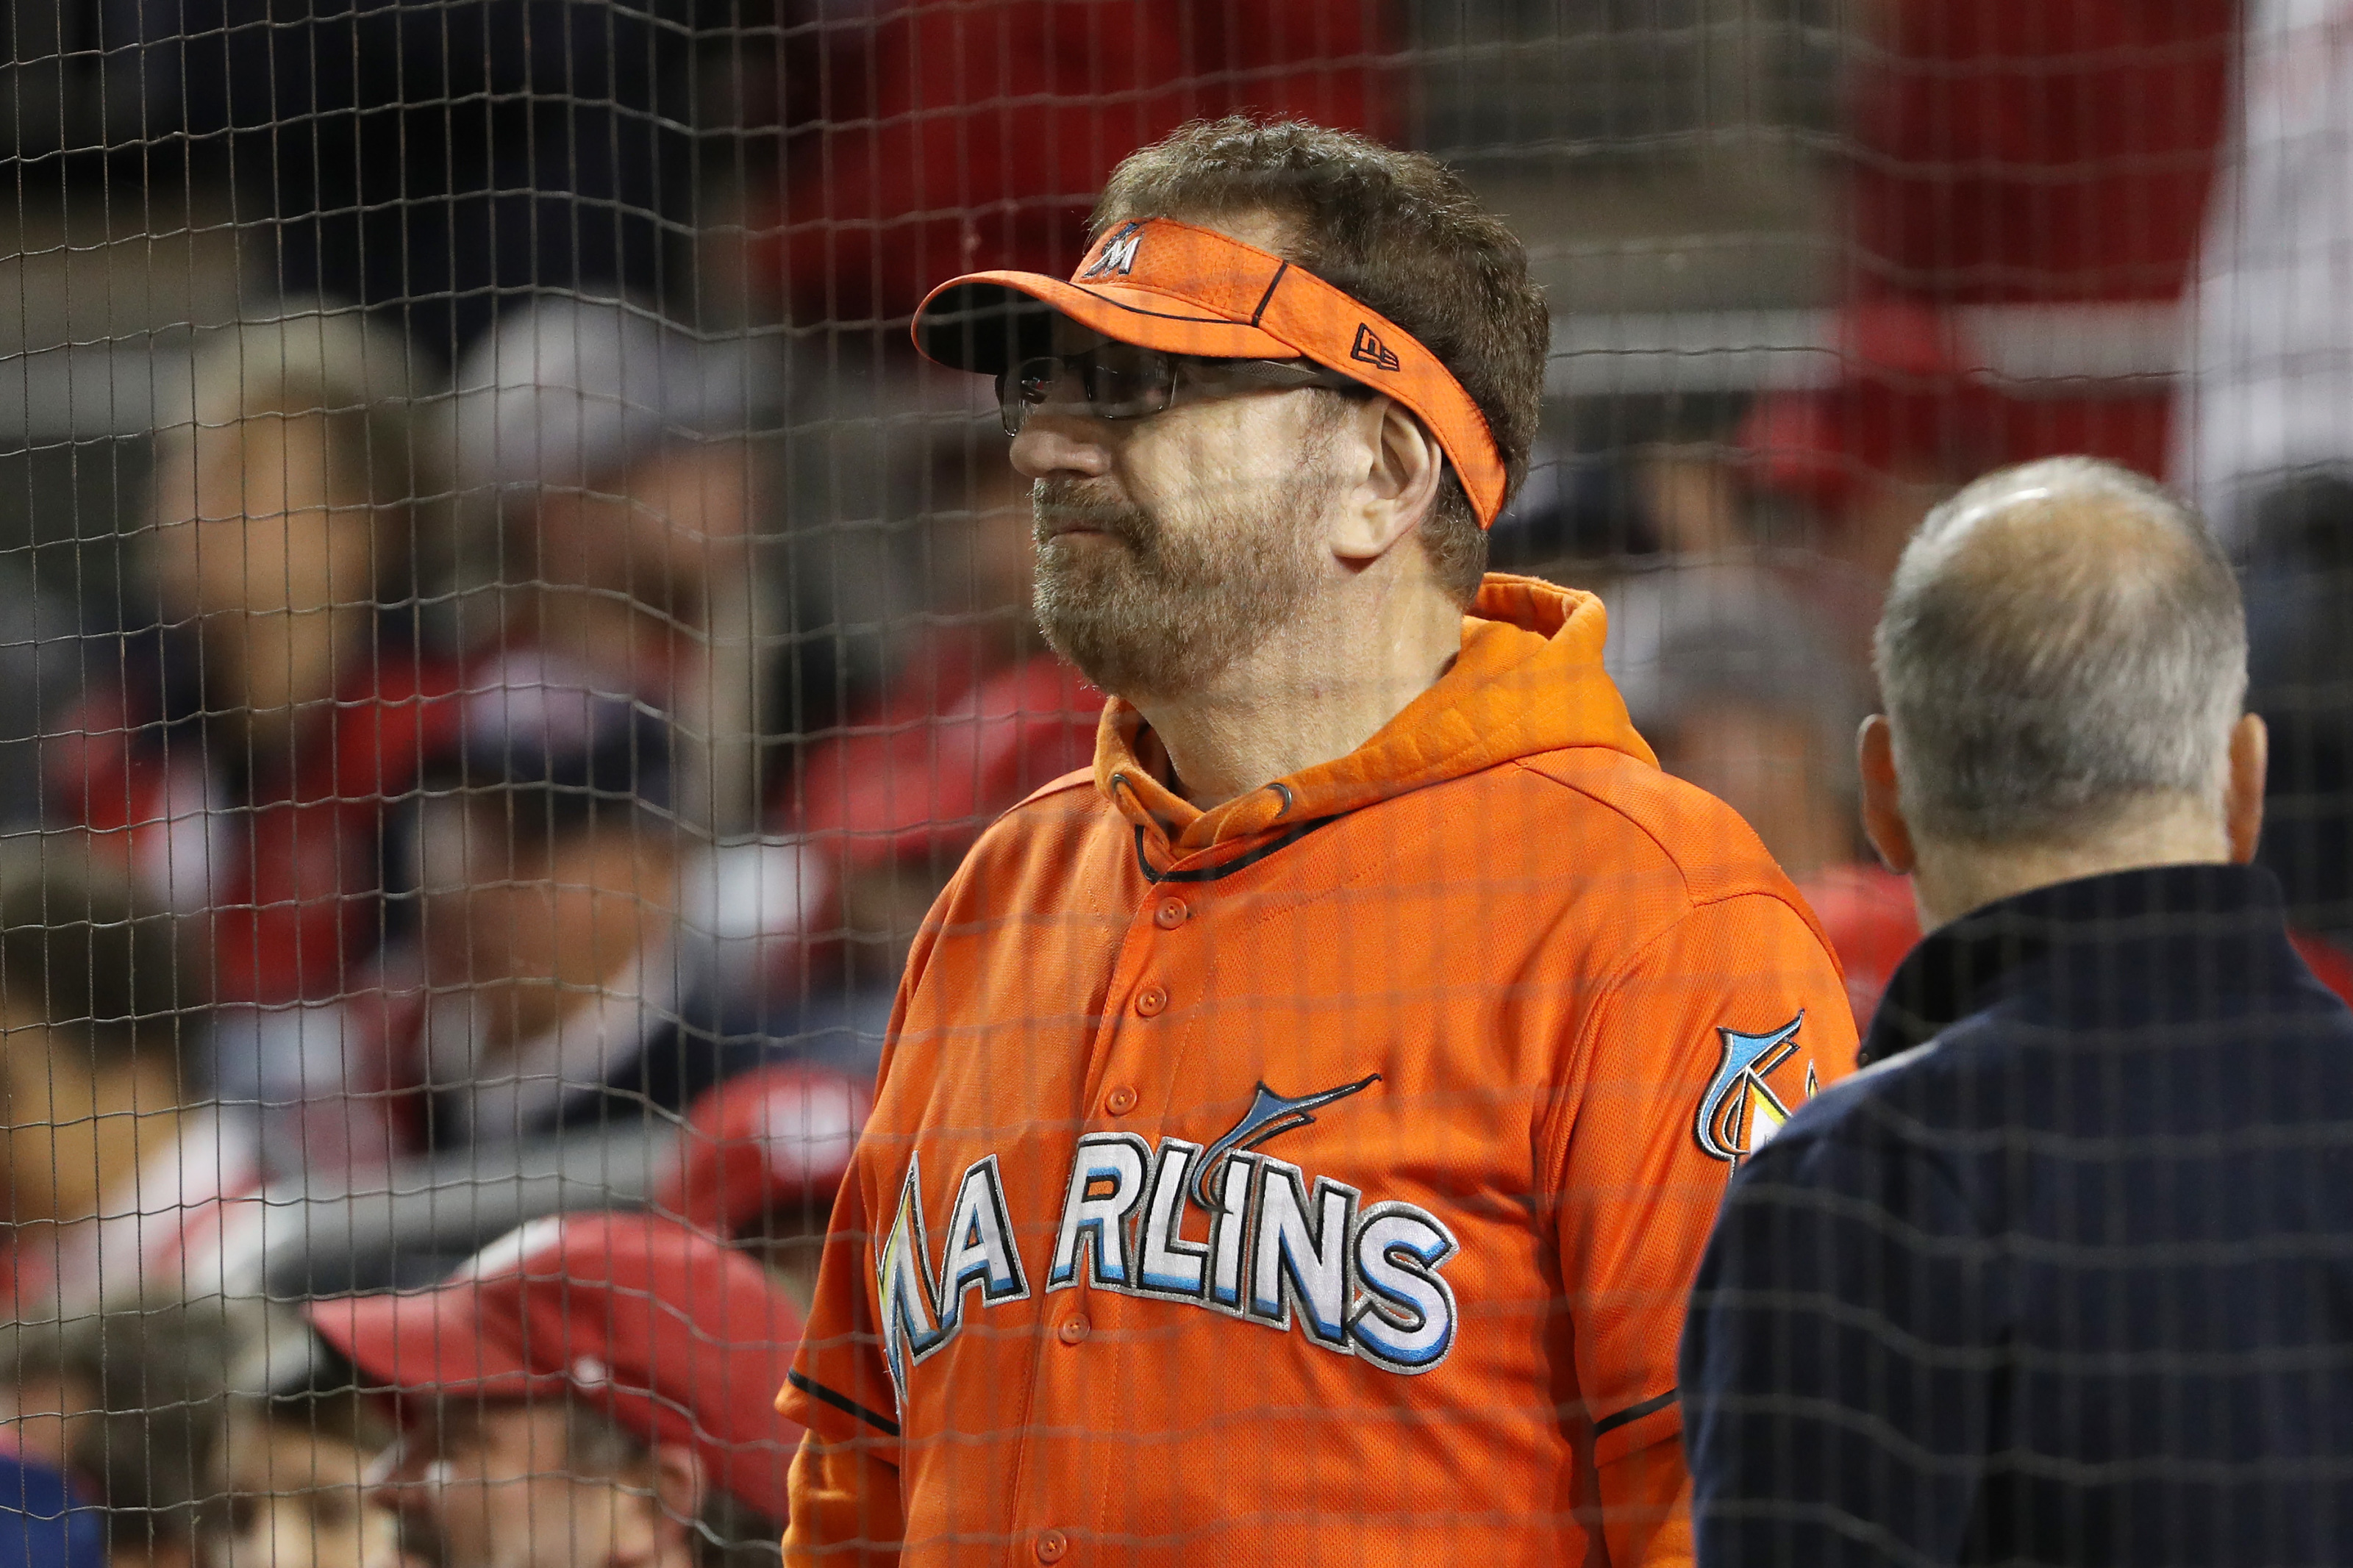 Marlins Man Says He Will Wear Same Jersey At Next Royals Game 